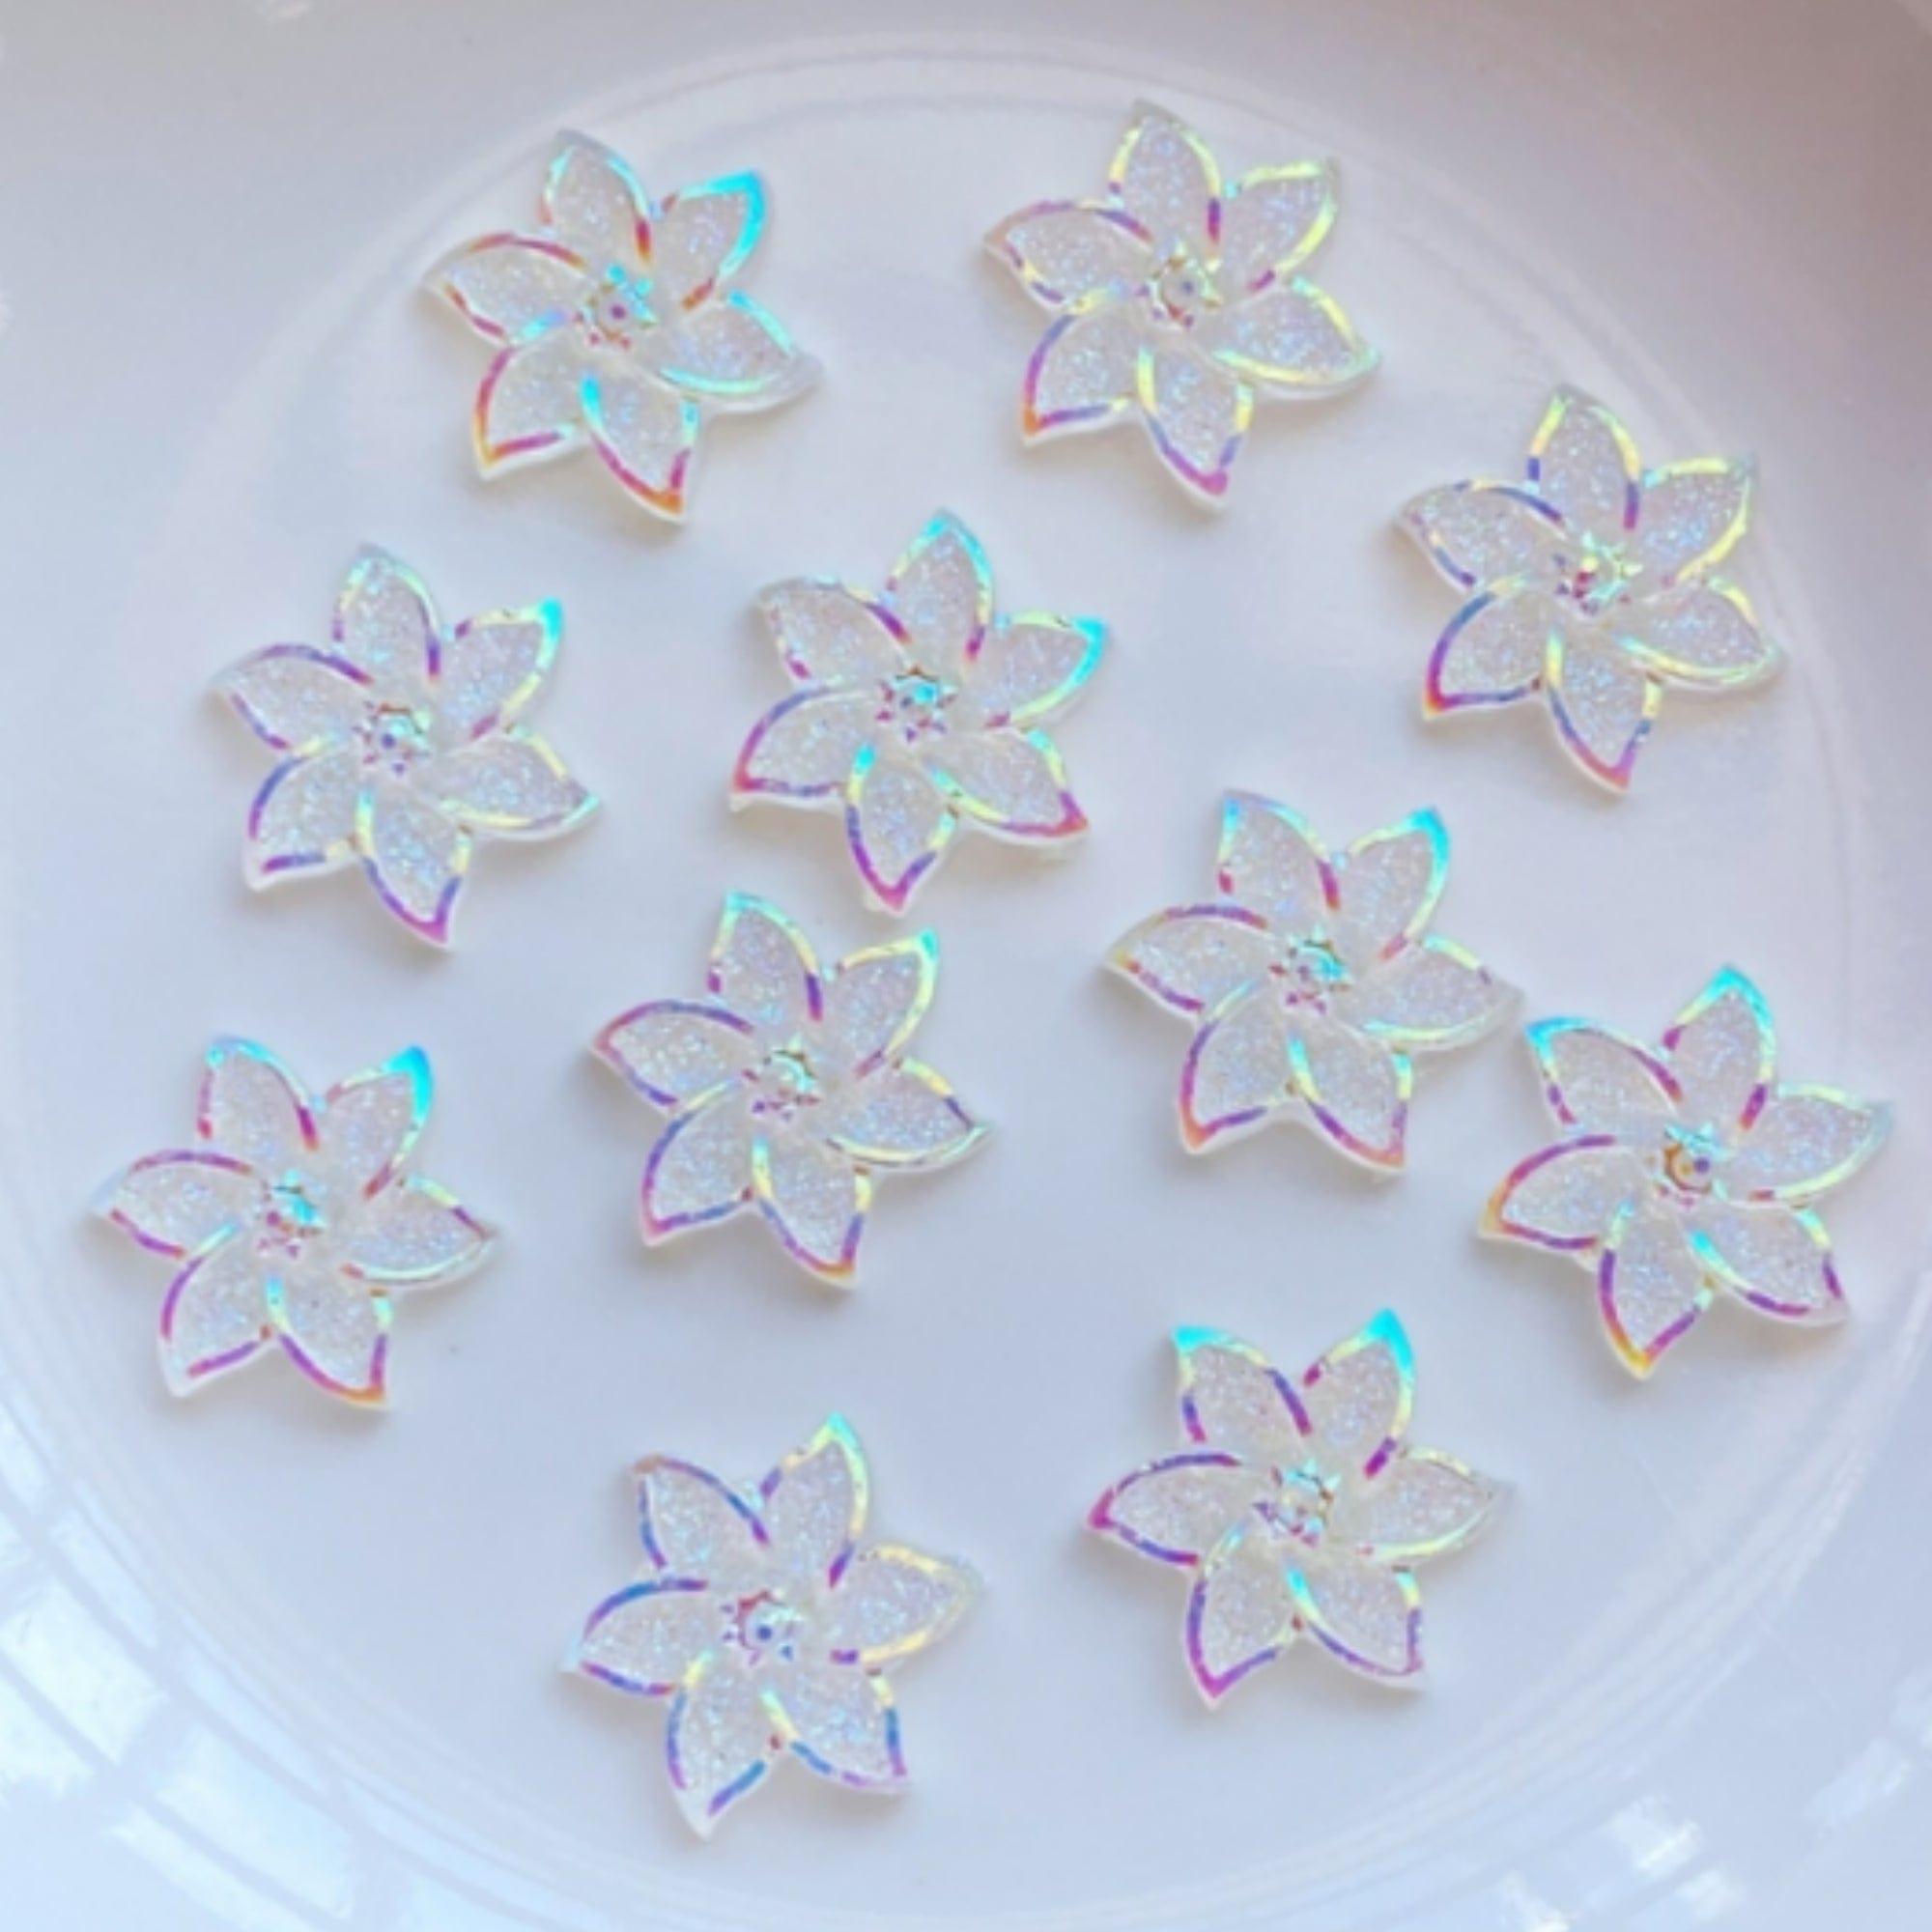 Iridescent White Ice Mini Flower Resin 1/2 inch Flatback Embellishments by SSC Designs - 10 pieces